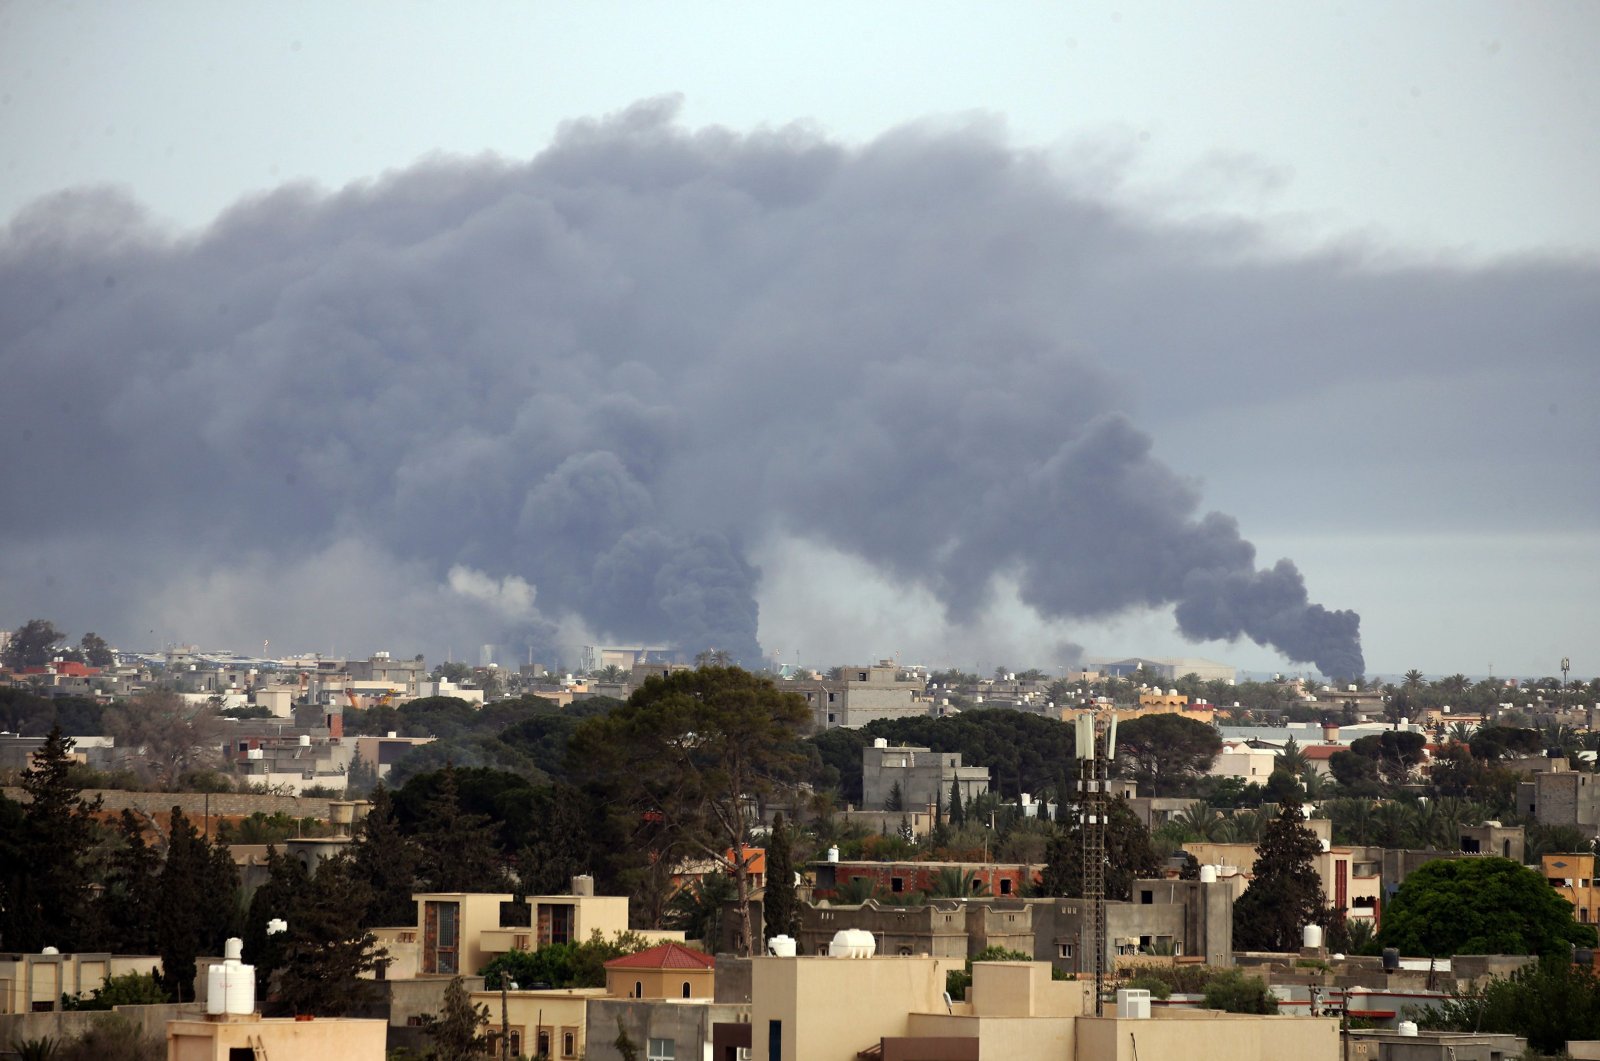 Smoke fumes rise above buildings in the Libyan capital Tripoli, during reported shelling by Khalifa Haftar's forces, on May 9, 2020. (AFP Photo)